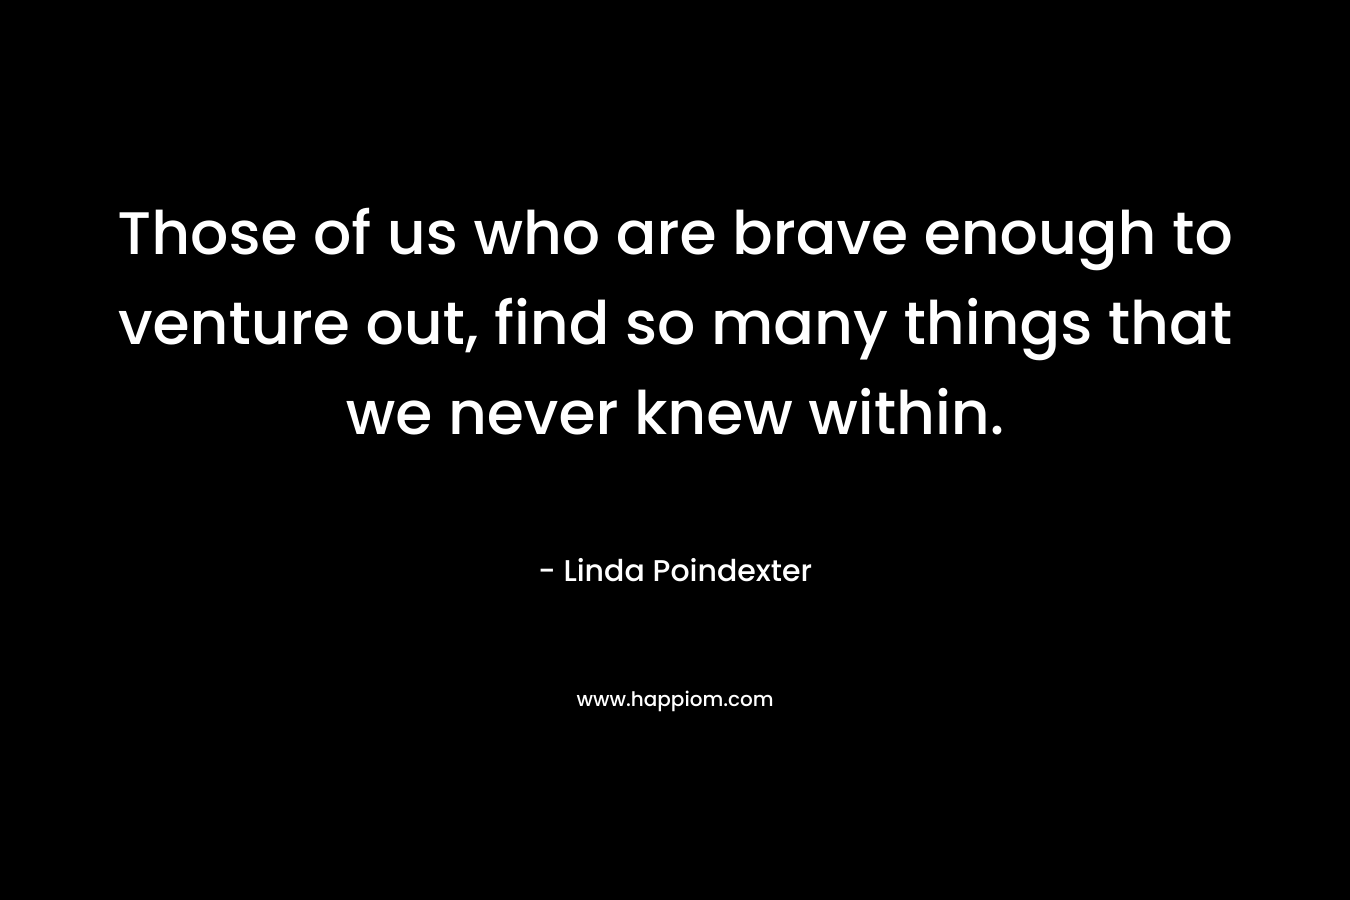 Those of us who are brave enough to venture out, find so many things that we never knew within. – Linda Poindexter